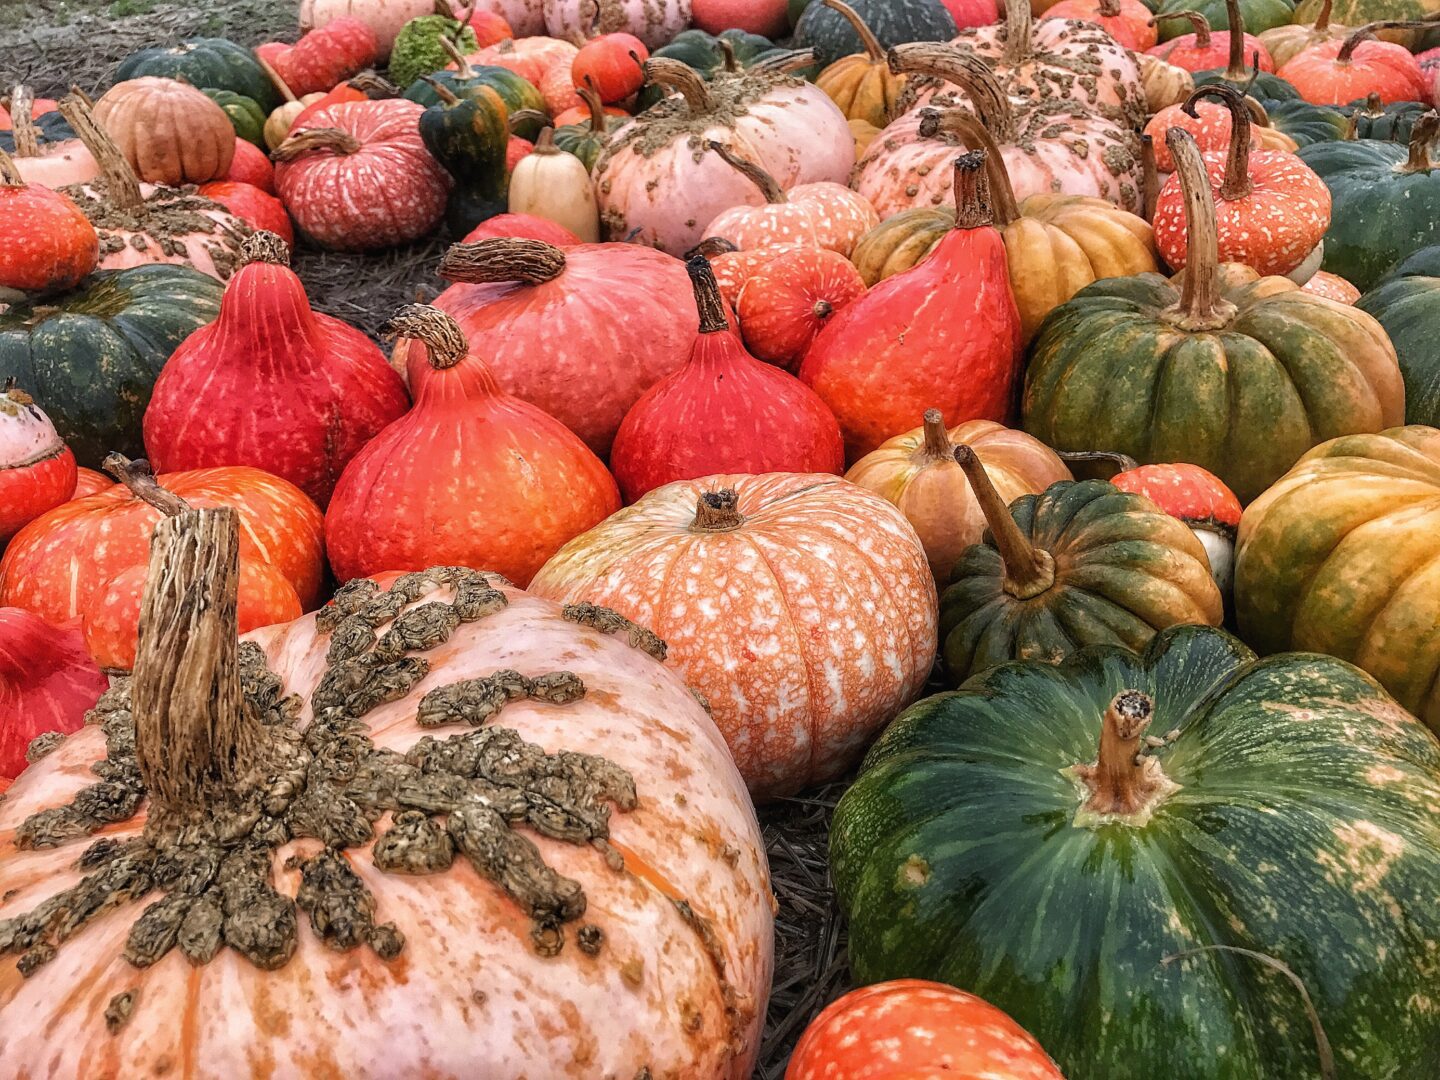 A group of pumpkins are arranged in a field.